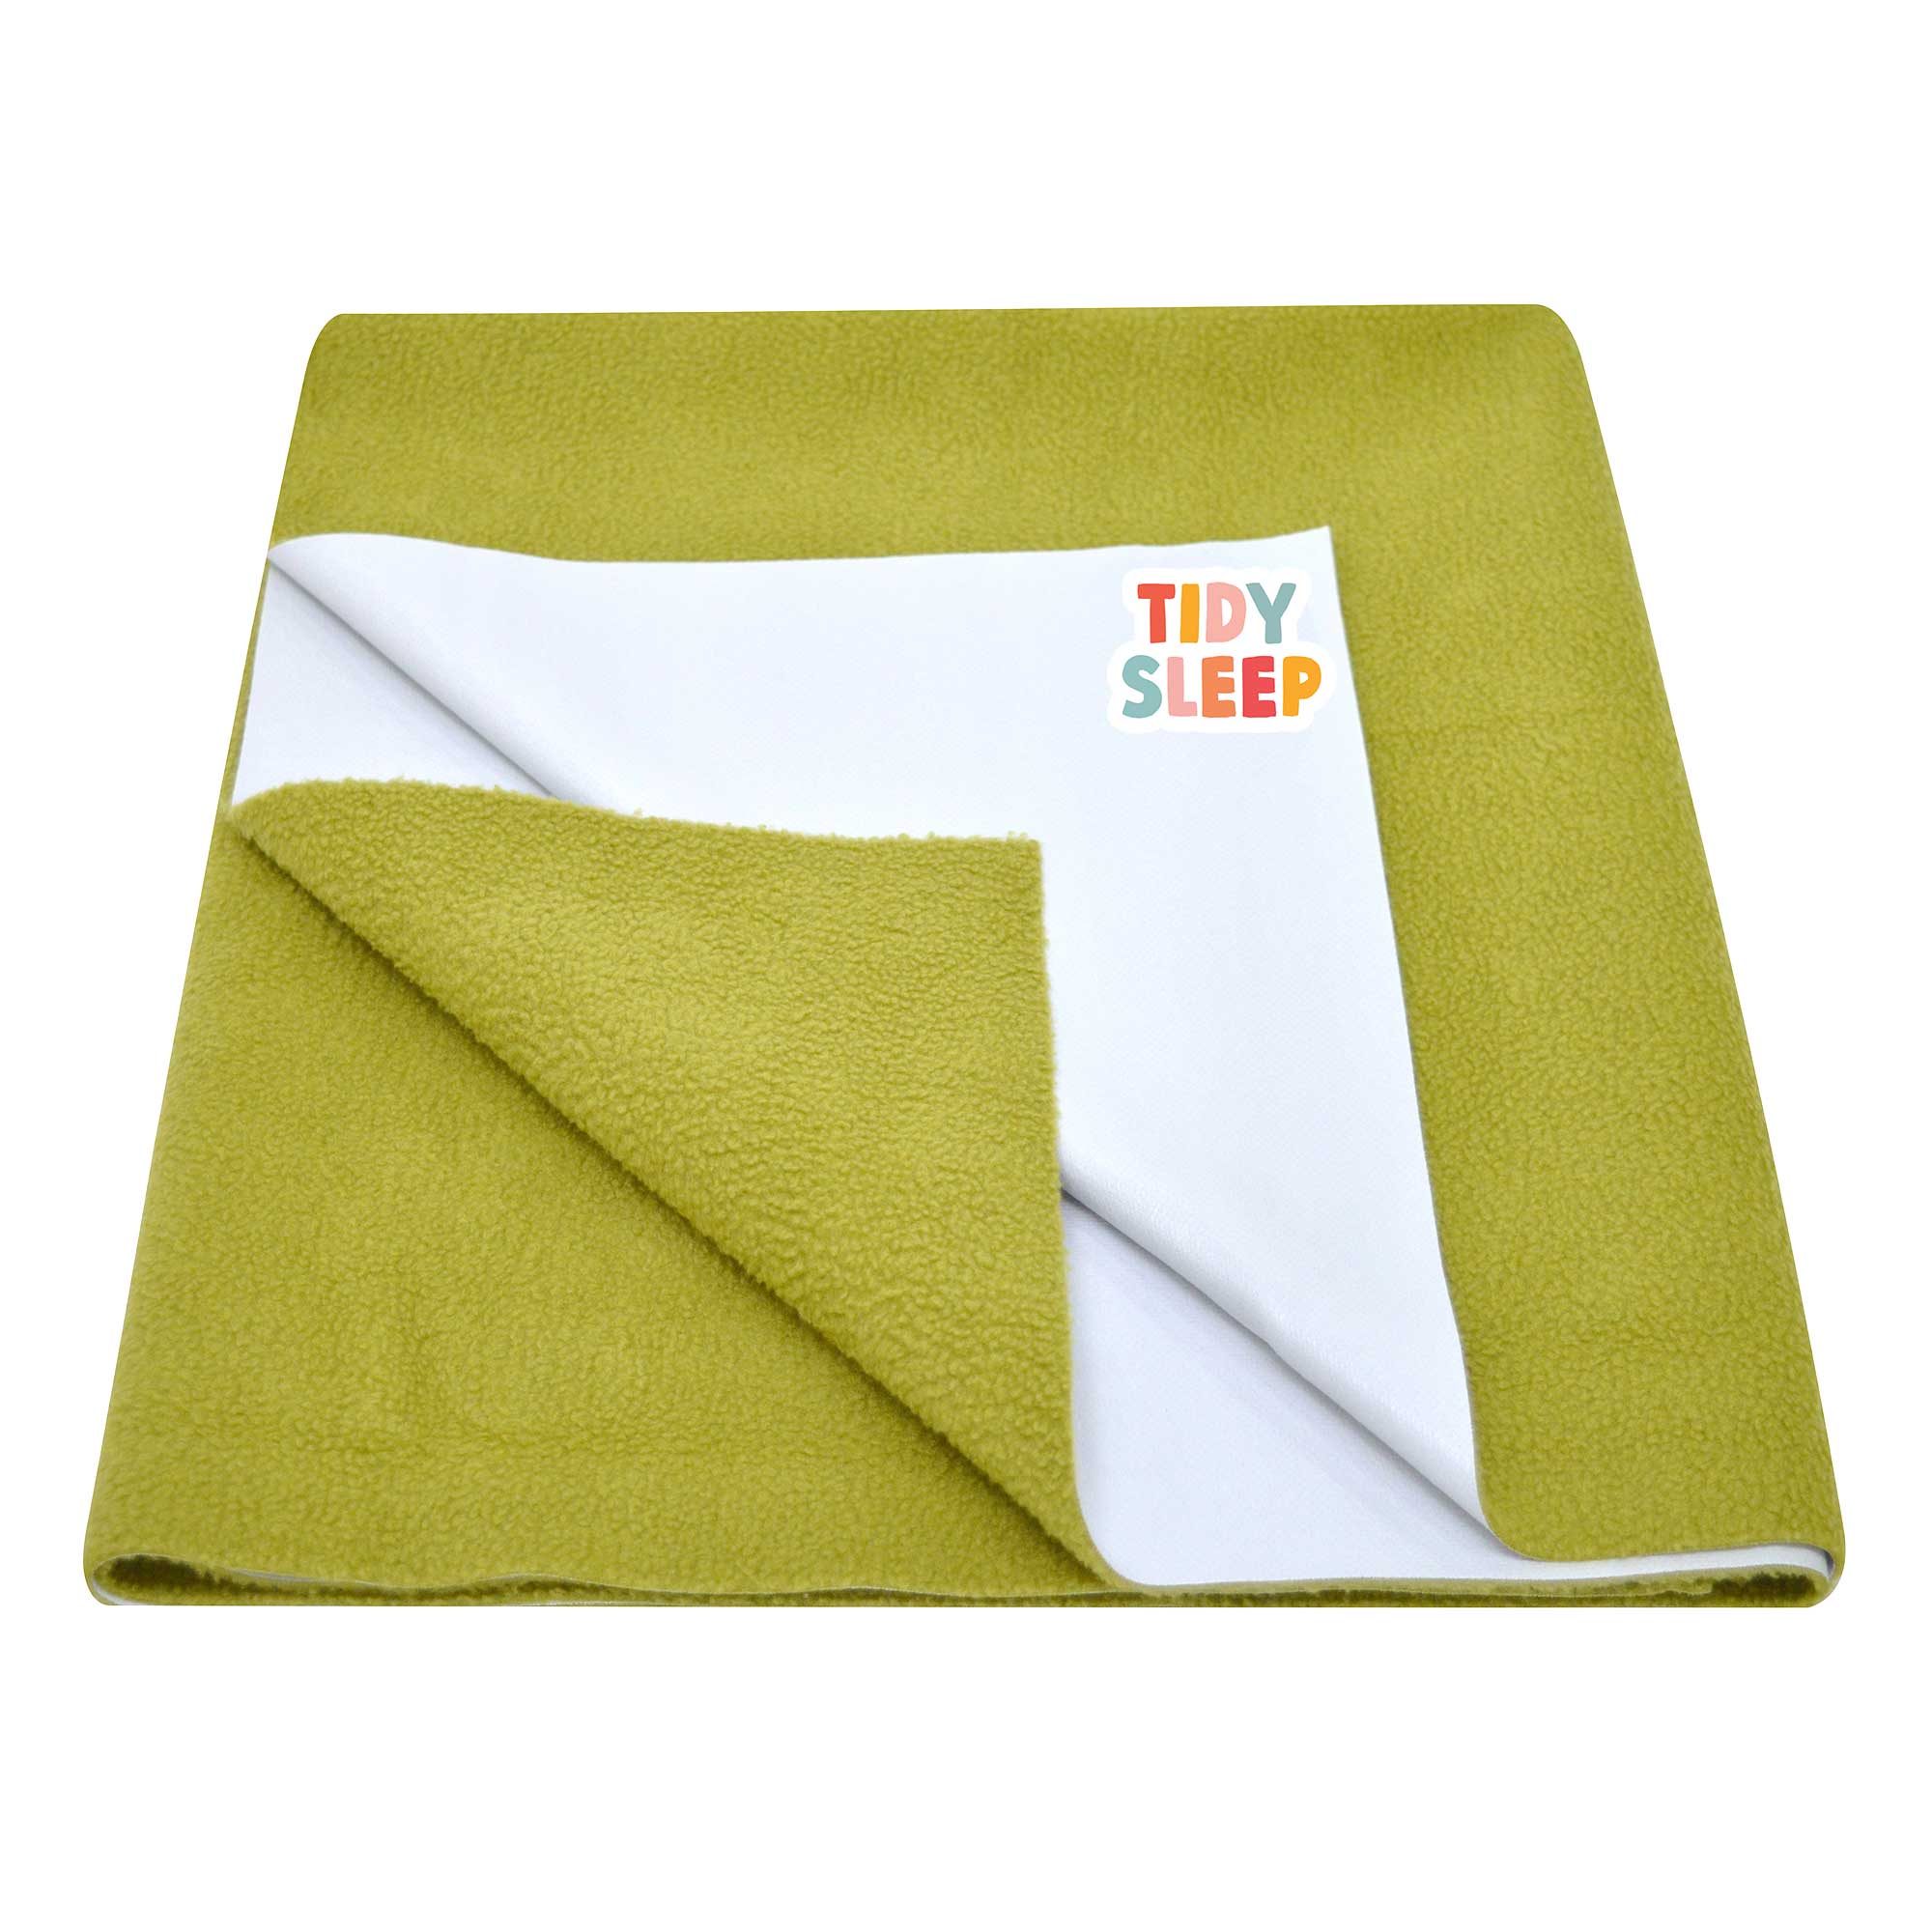 Tidy Sleep Waterproof Baby Bed Protector Dry Sheet for New Born Babies - Olive